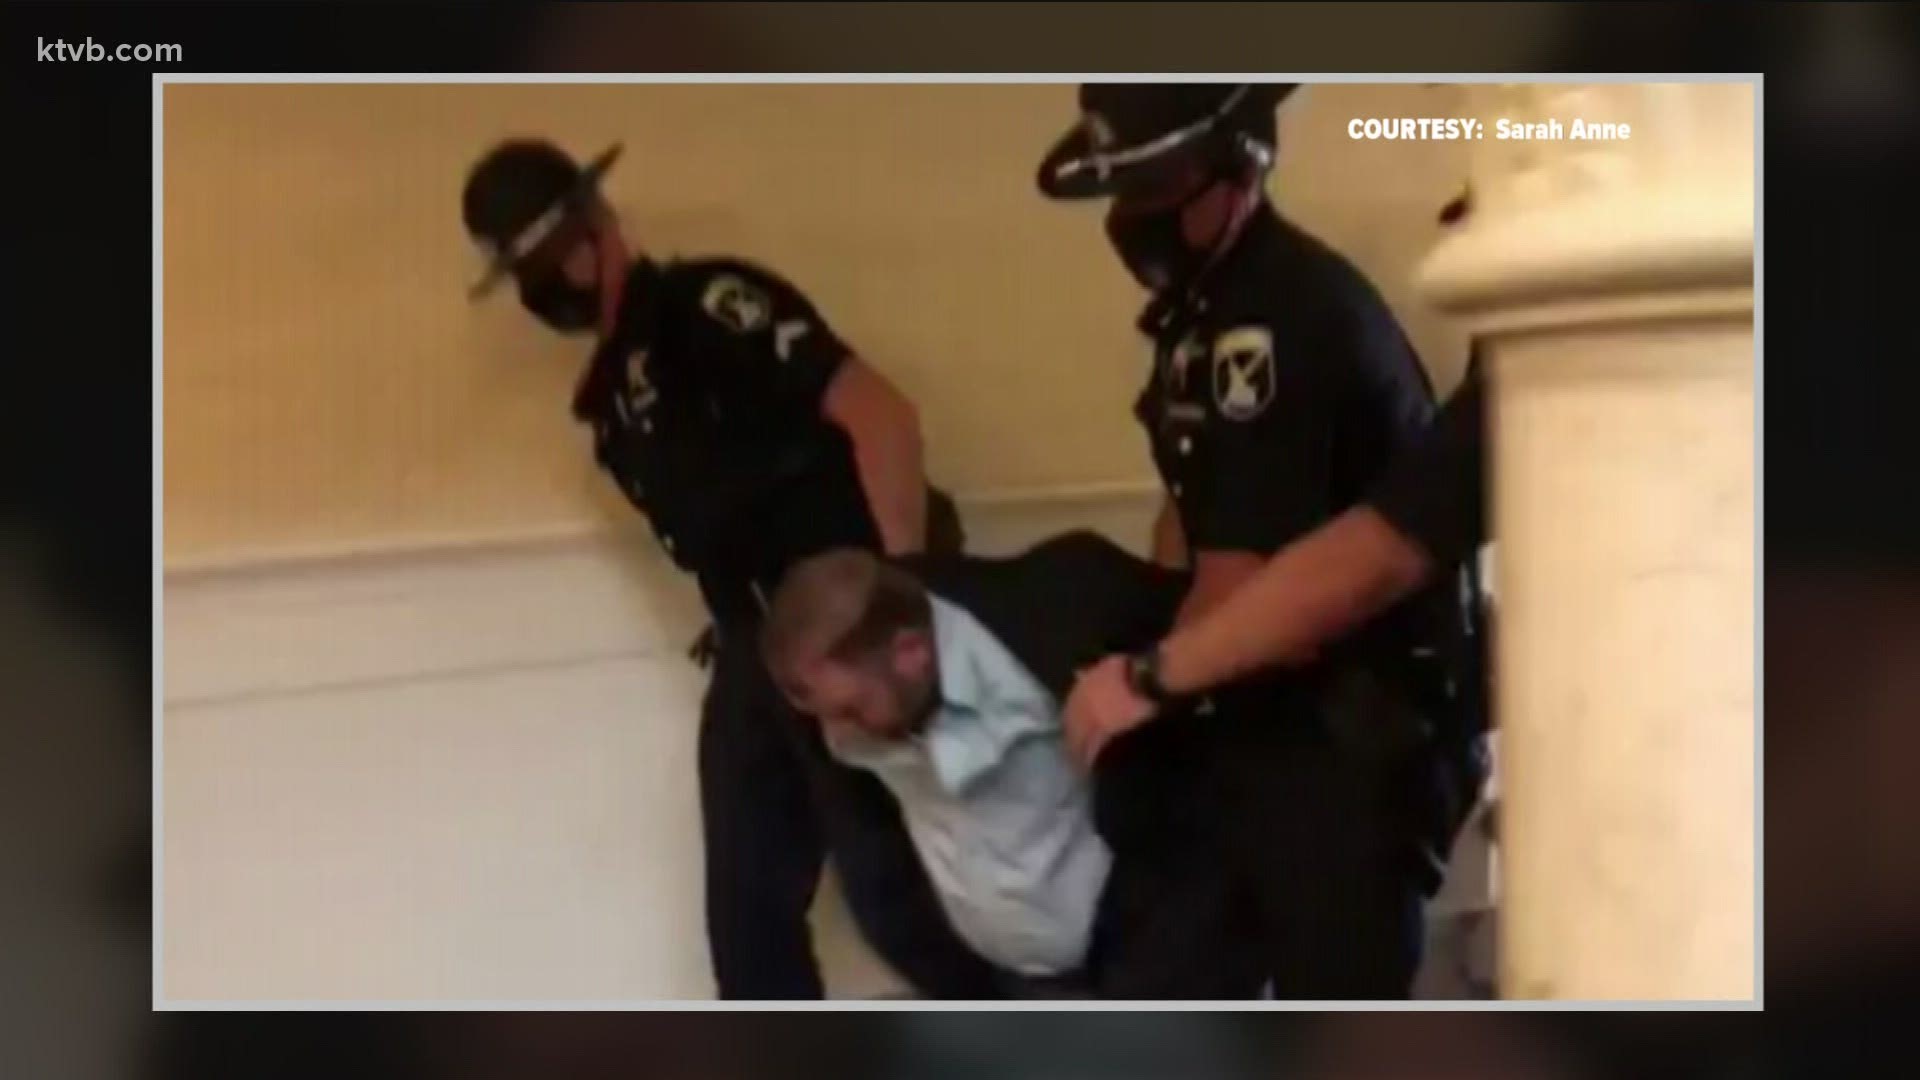 Bundy was taken into custody in the gallery of the Idaho Senate for trespassing. He was handcuffed and removed from the Capitol by state troopers.